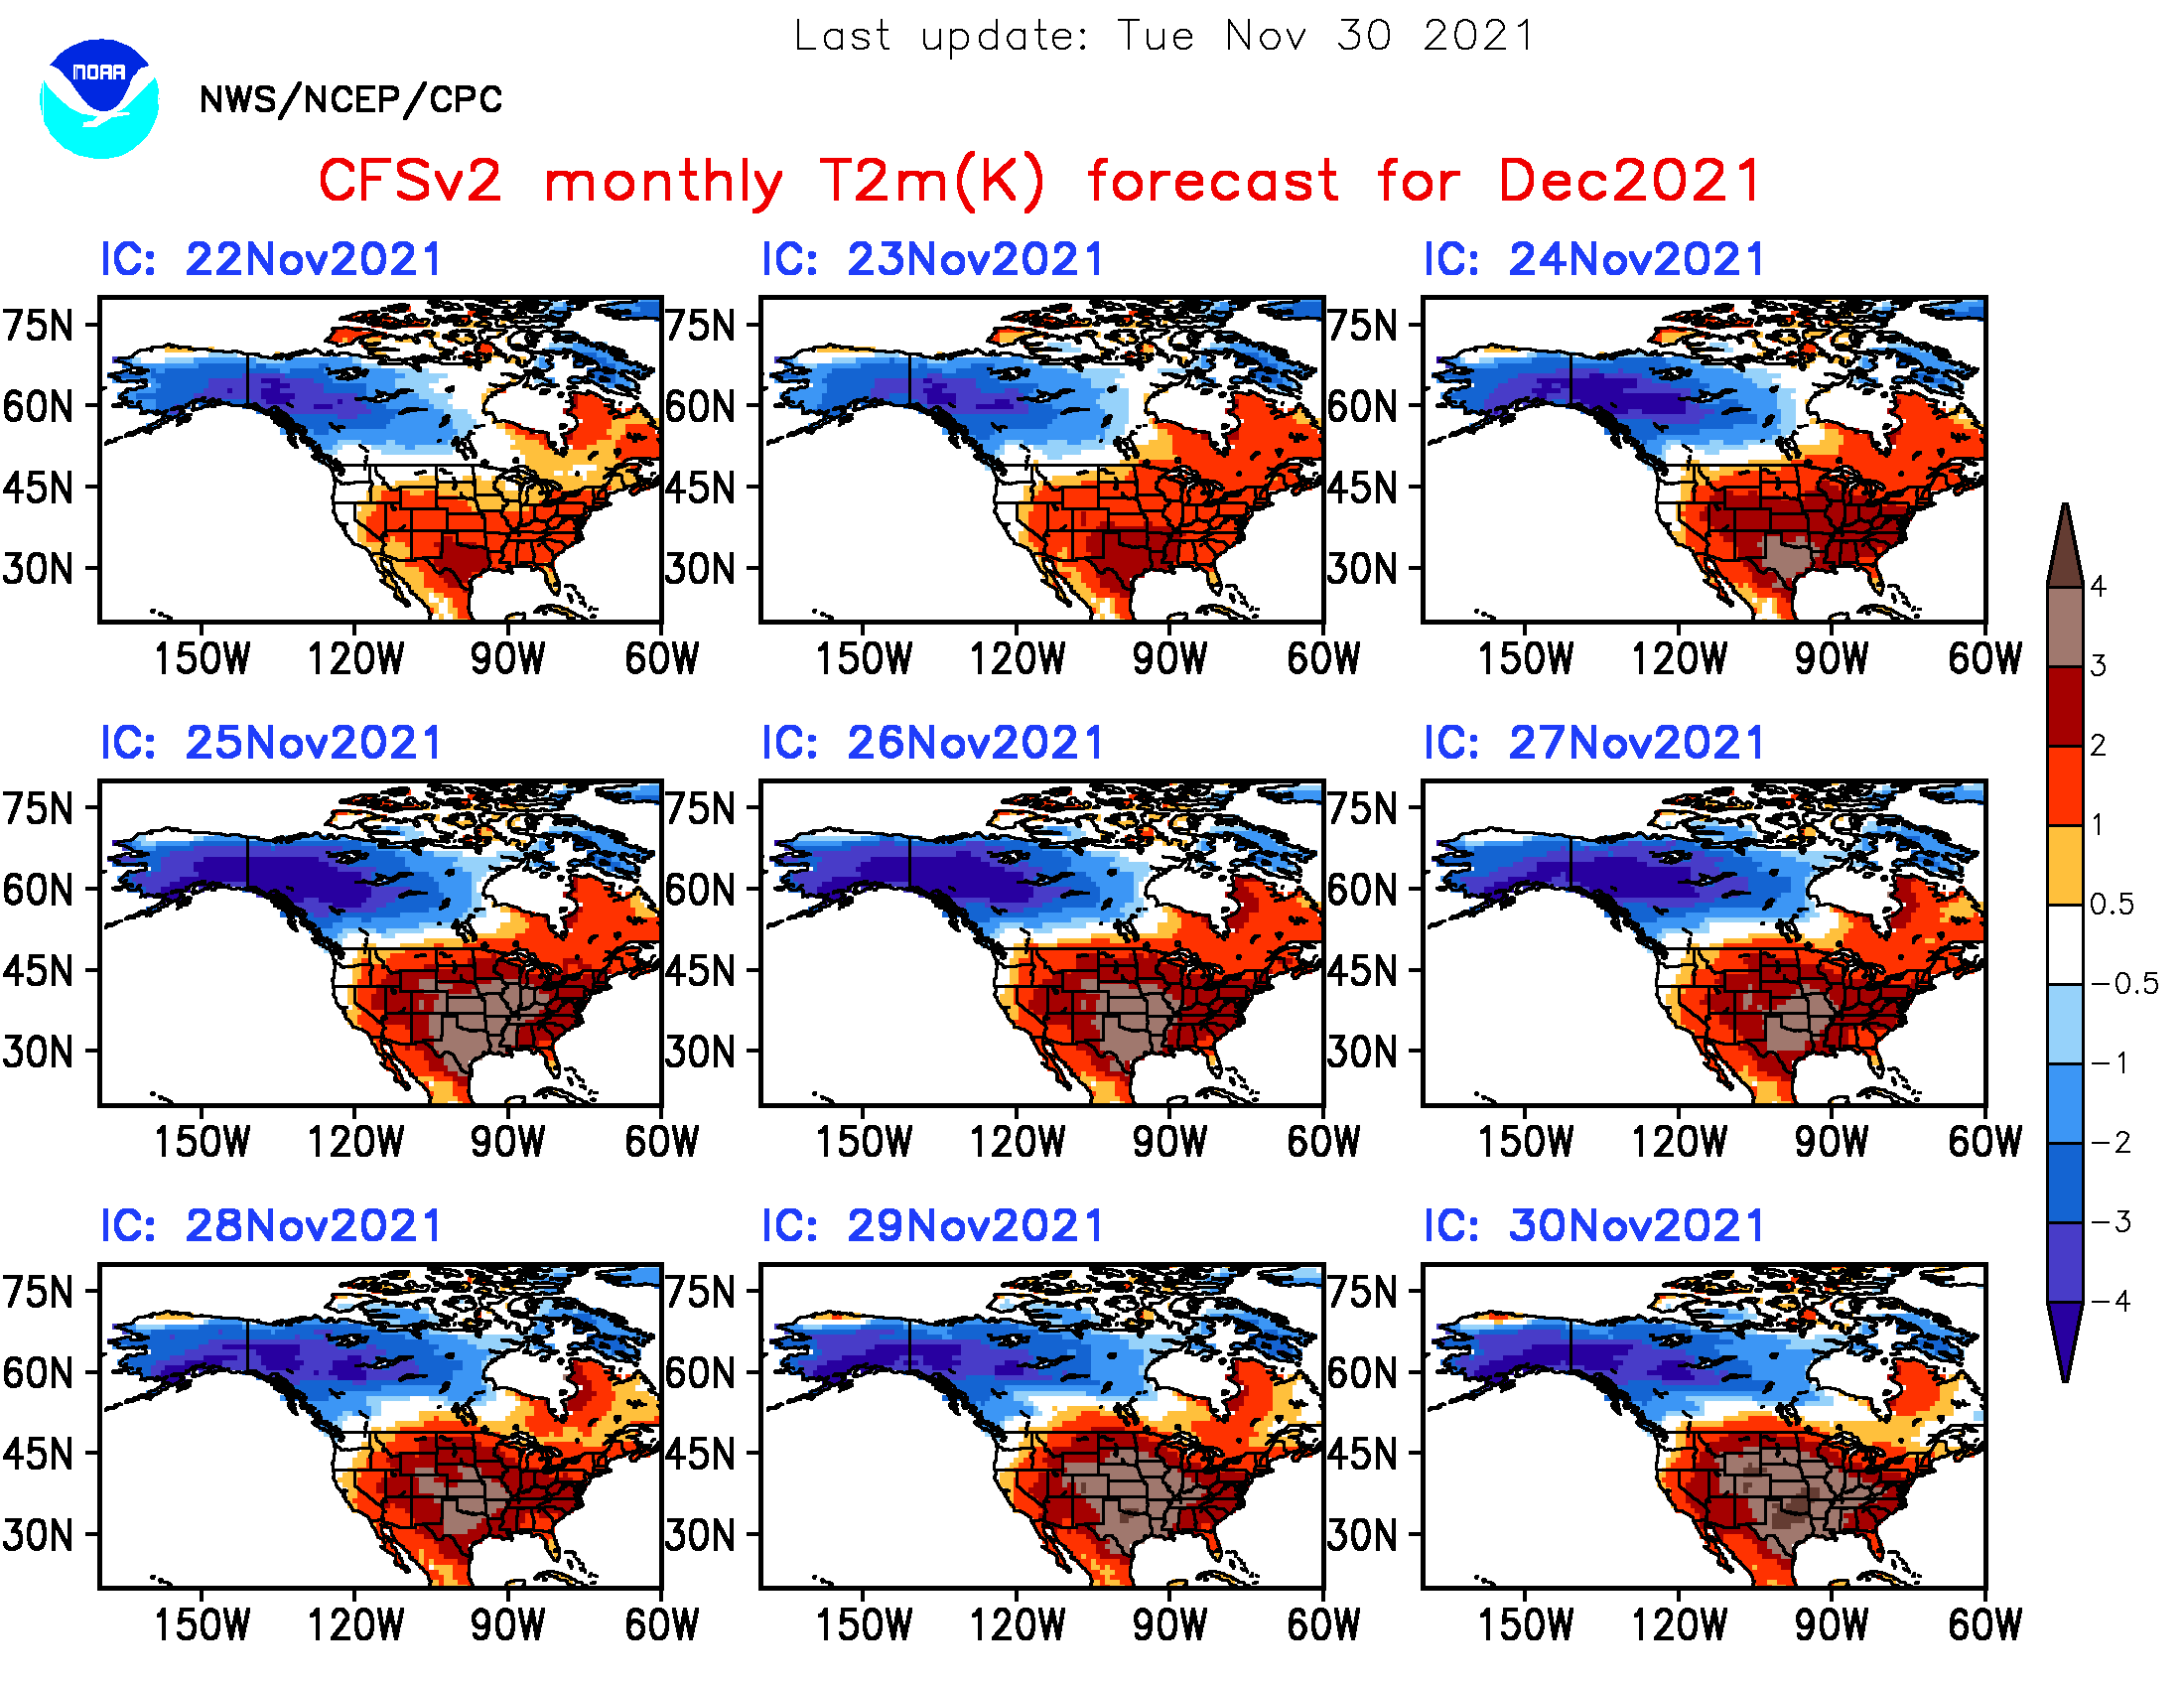 https://www.cpc.ncep.noaa.gov/products/people/mchen/CFSv2FCST/monthly/images/summaryCFSv2.NaT2m.202112.gif